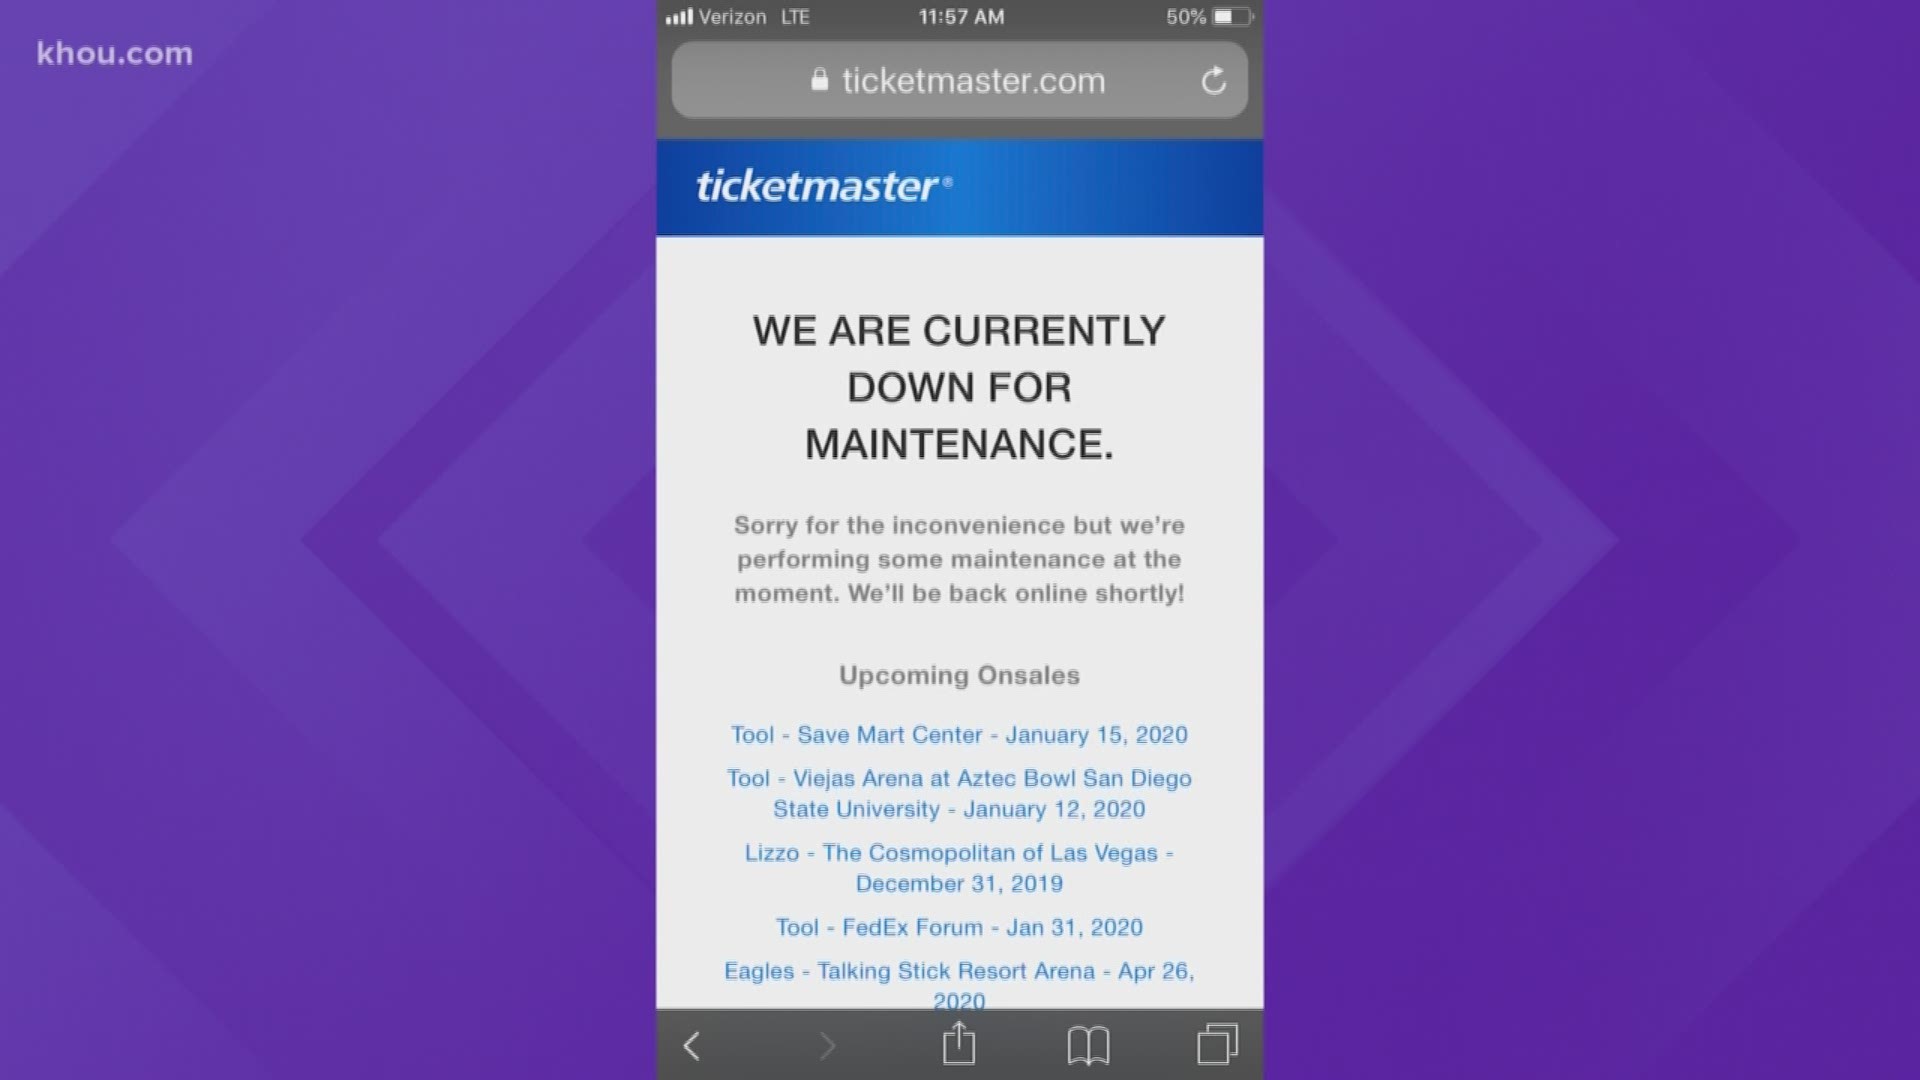 Some Houstonians trying to get early access to tickets for Kanye West's Sunday Service at Lakewood Church ran into a glitch on Ticketmaster's site.